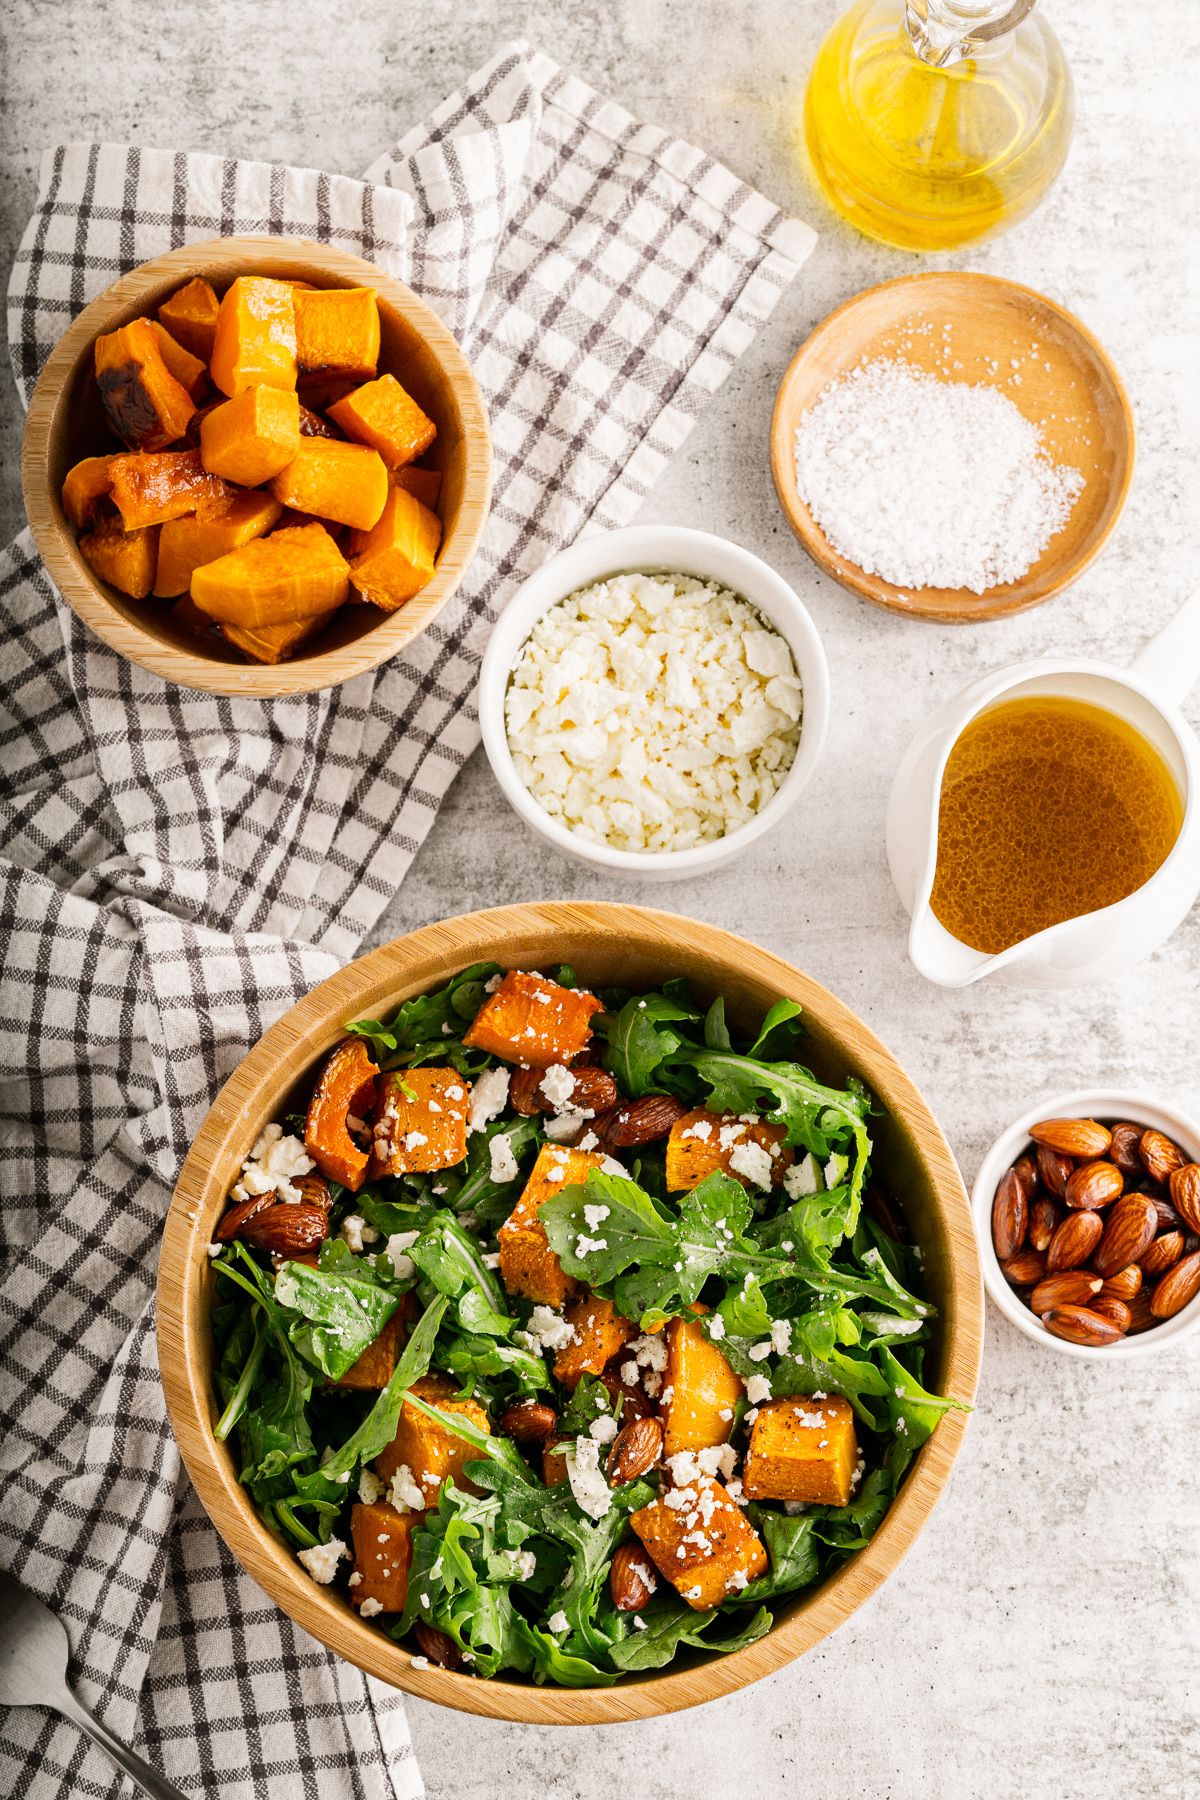 Butternut squash salad with roasted squash served with almonds, feta, and arugula with dressing on the side.